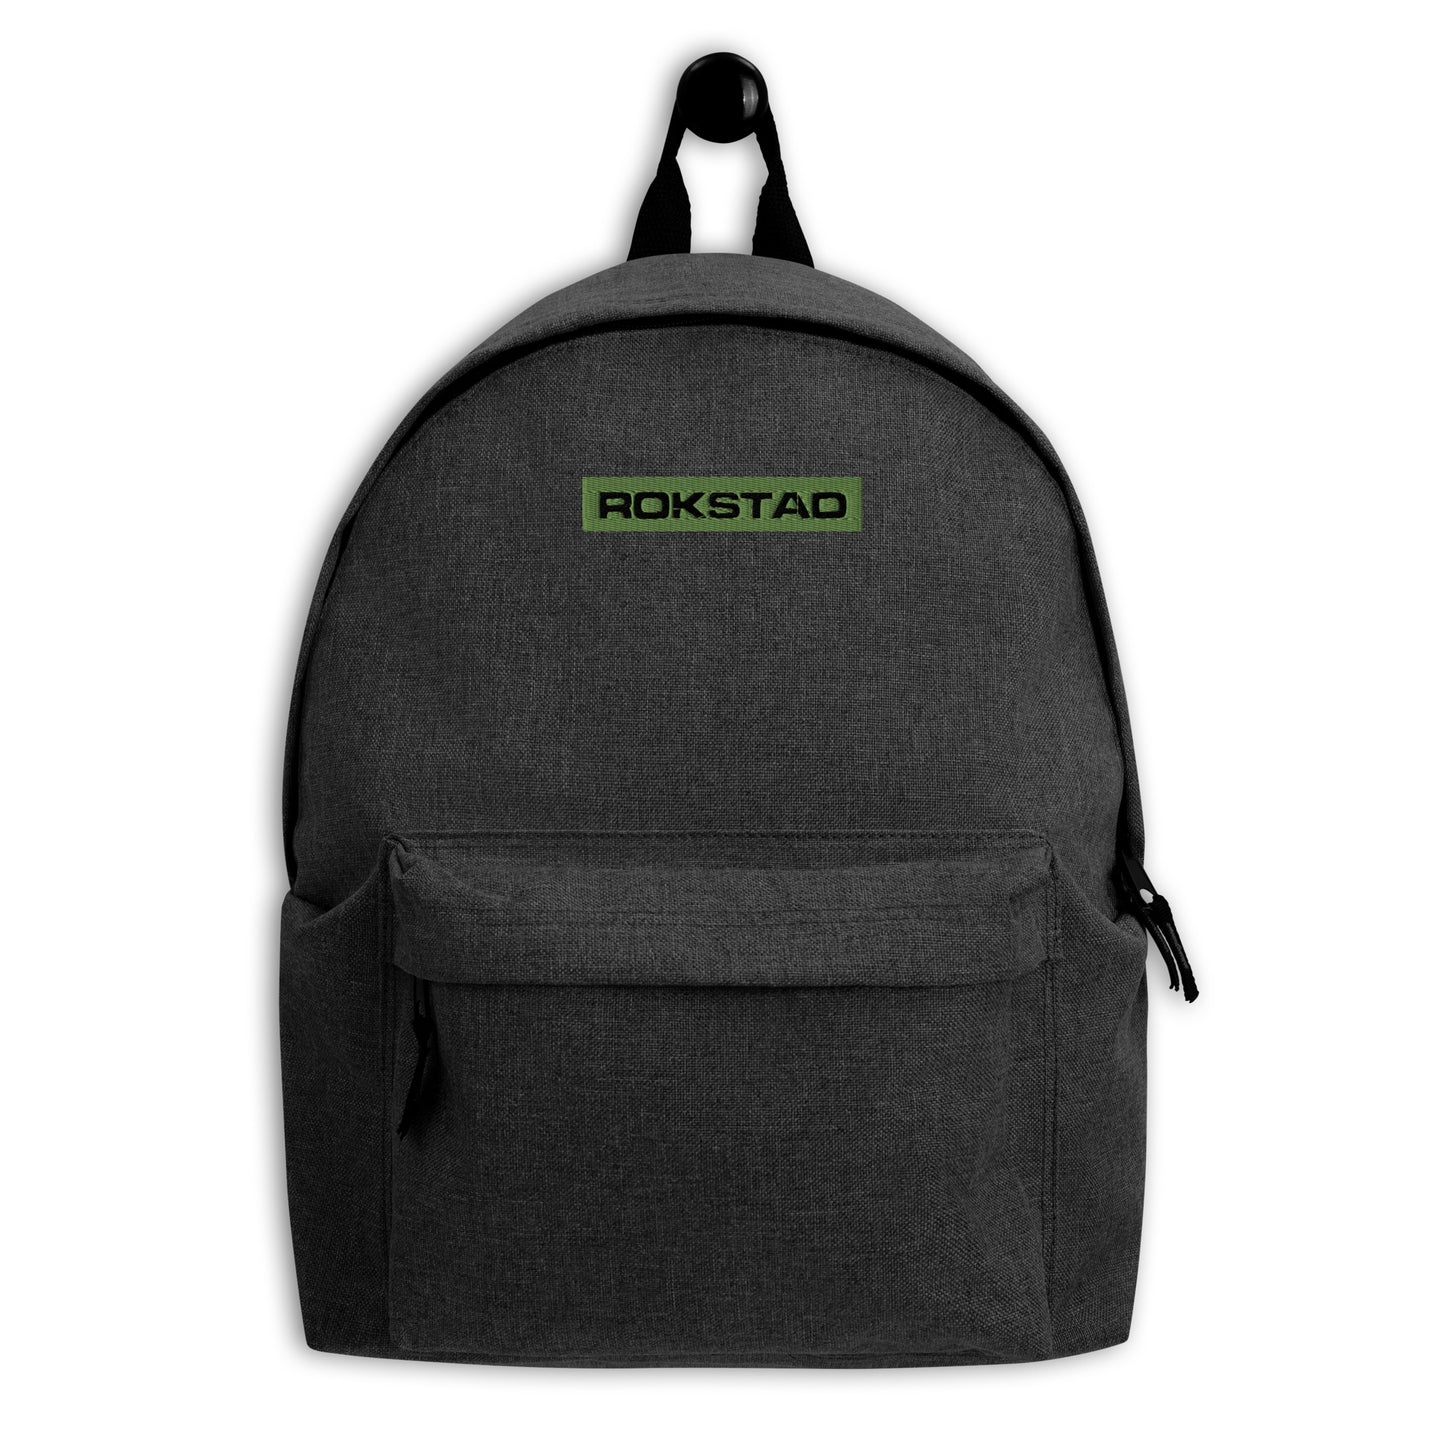 Rokstad - Embroidered Backpack